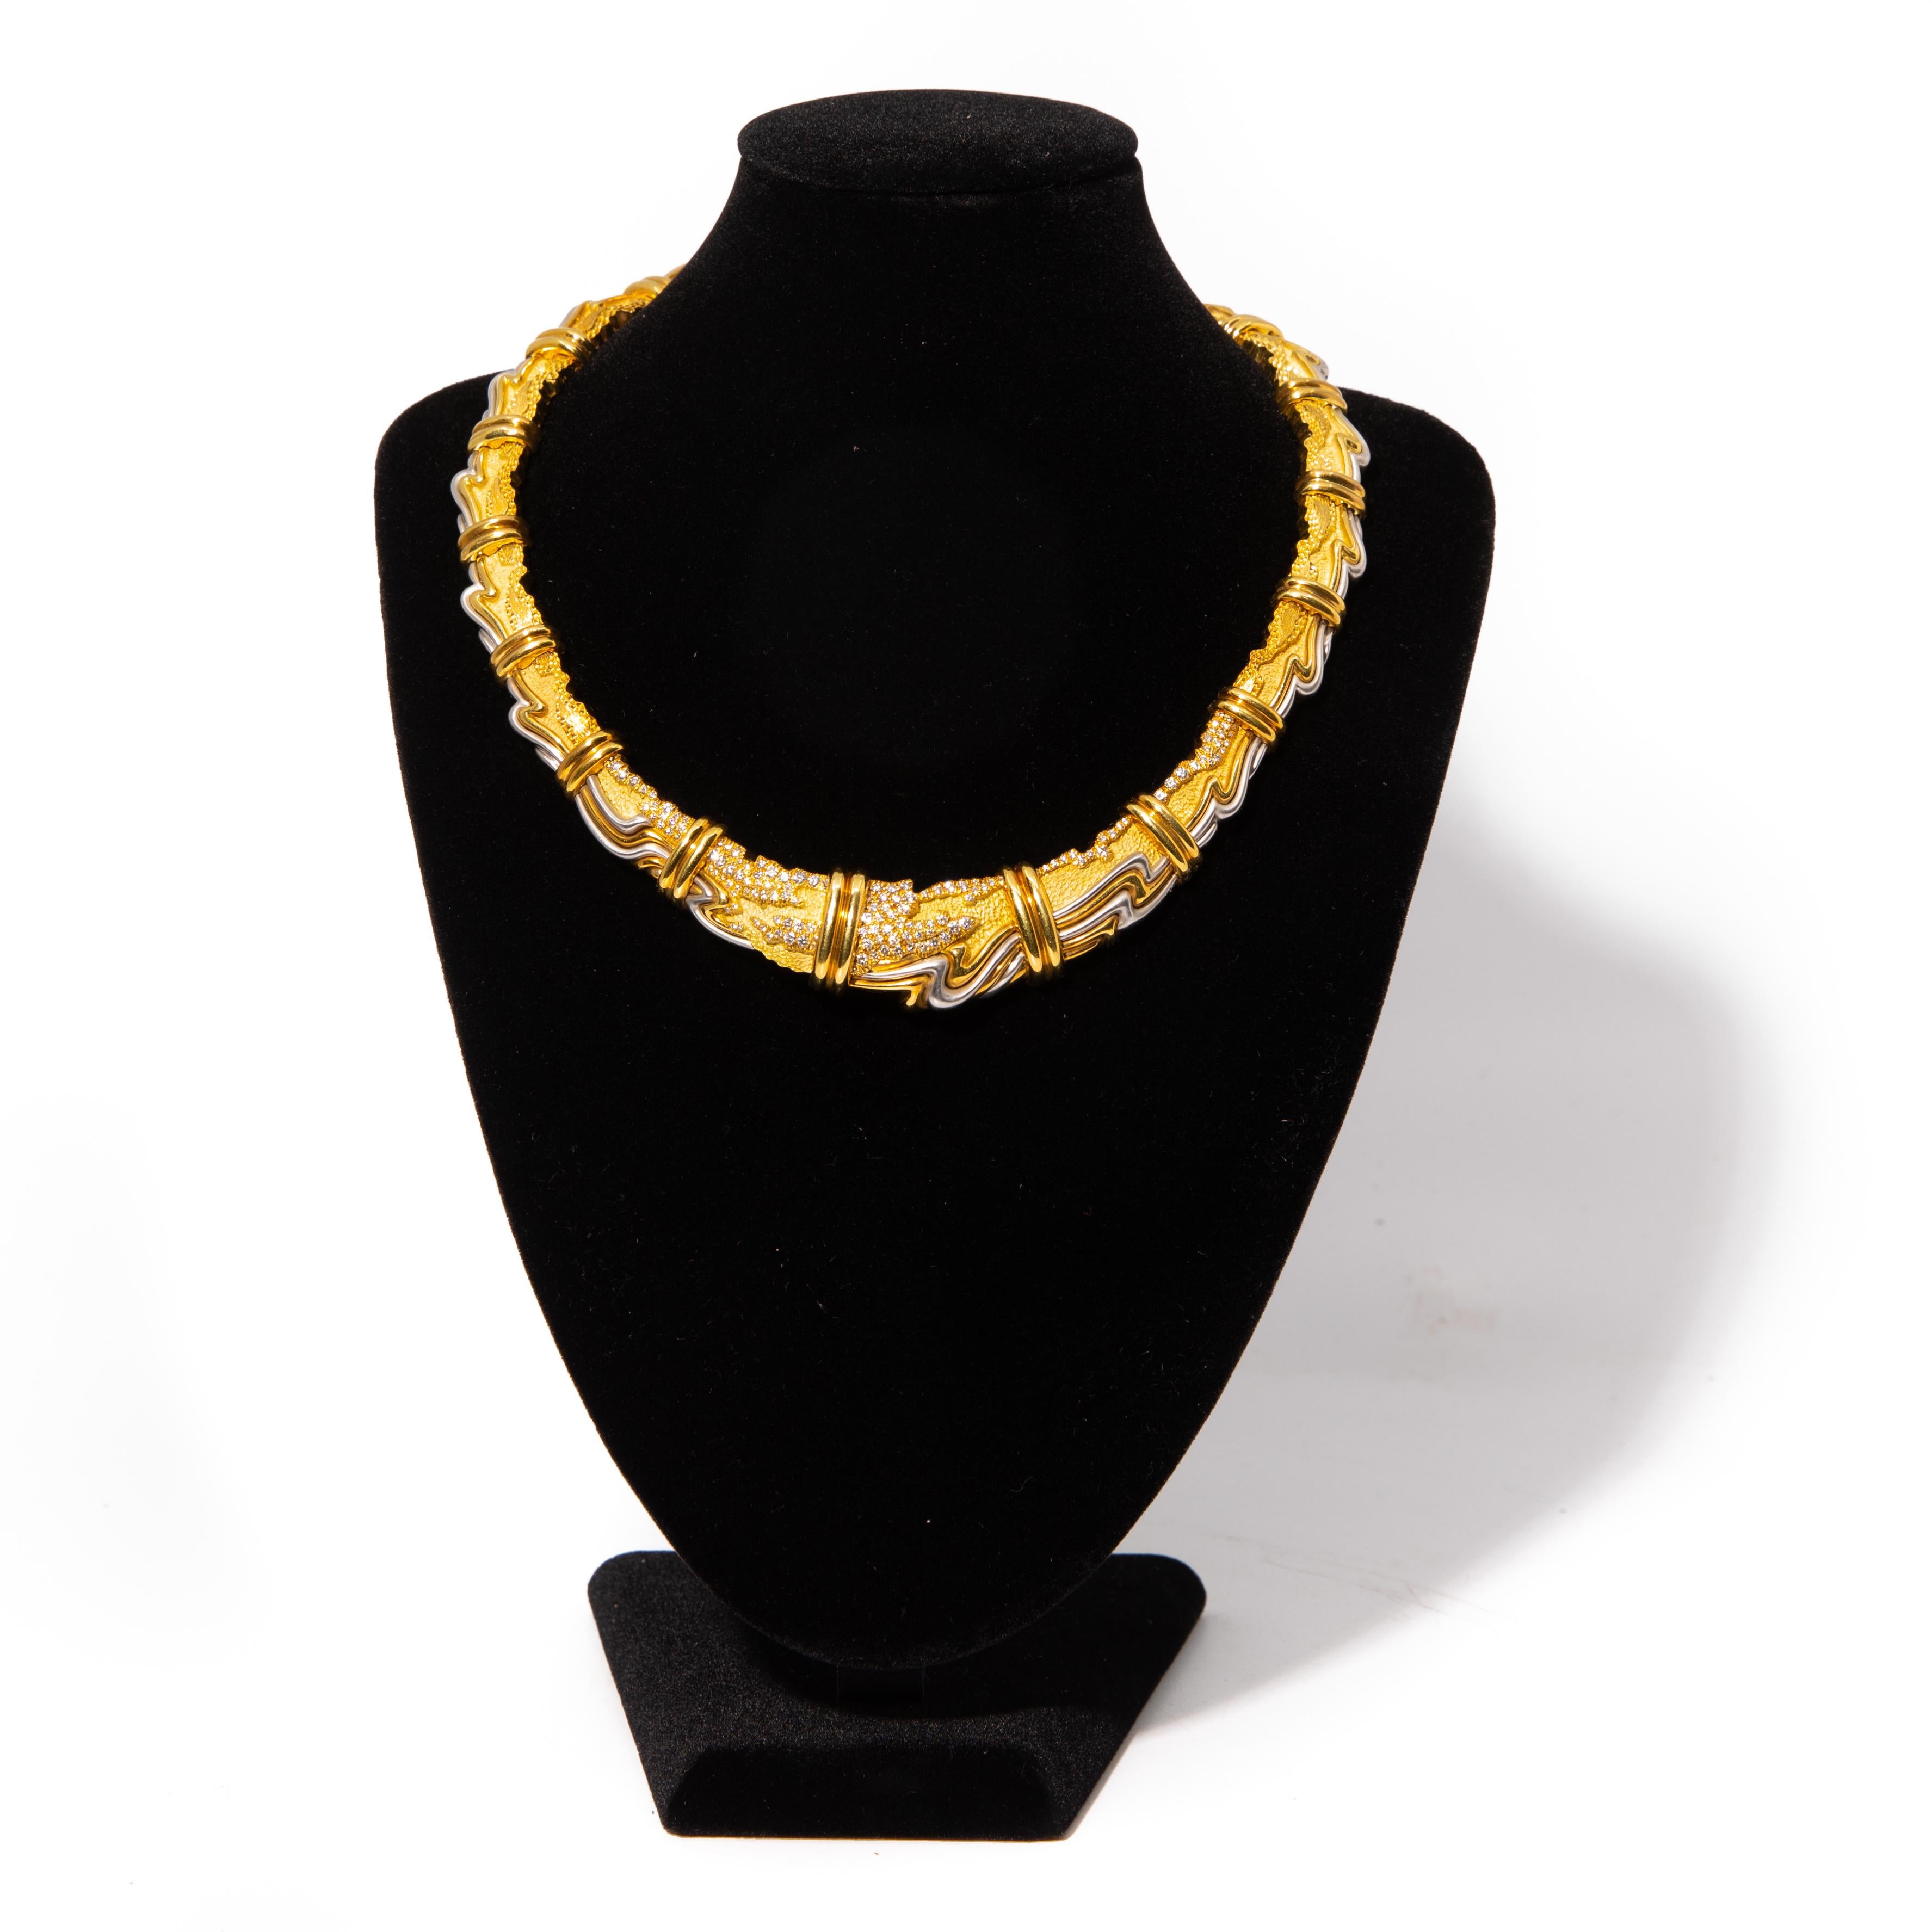 HENRY DUNAY, YELLOW GOLD, PLATINUM AND DIAMOND COLLAR NECKLACE. Consisting of textured matte and high polish graduating links, with organic yellow gold and platinum detail containing numerous round brilliant cut diamonds weighing approximately 1.65